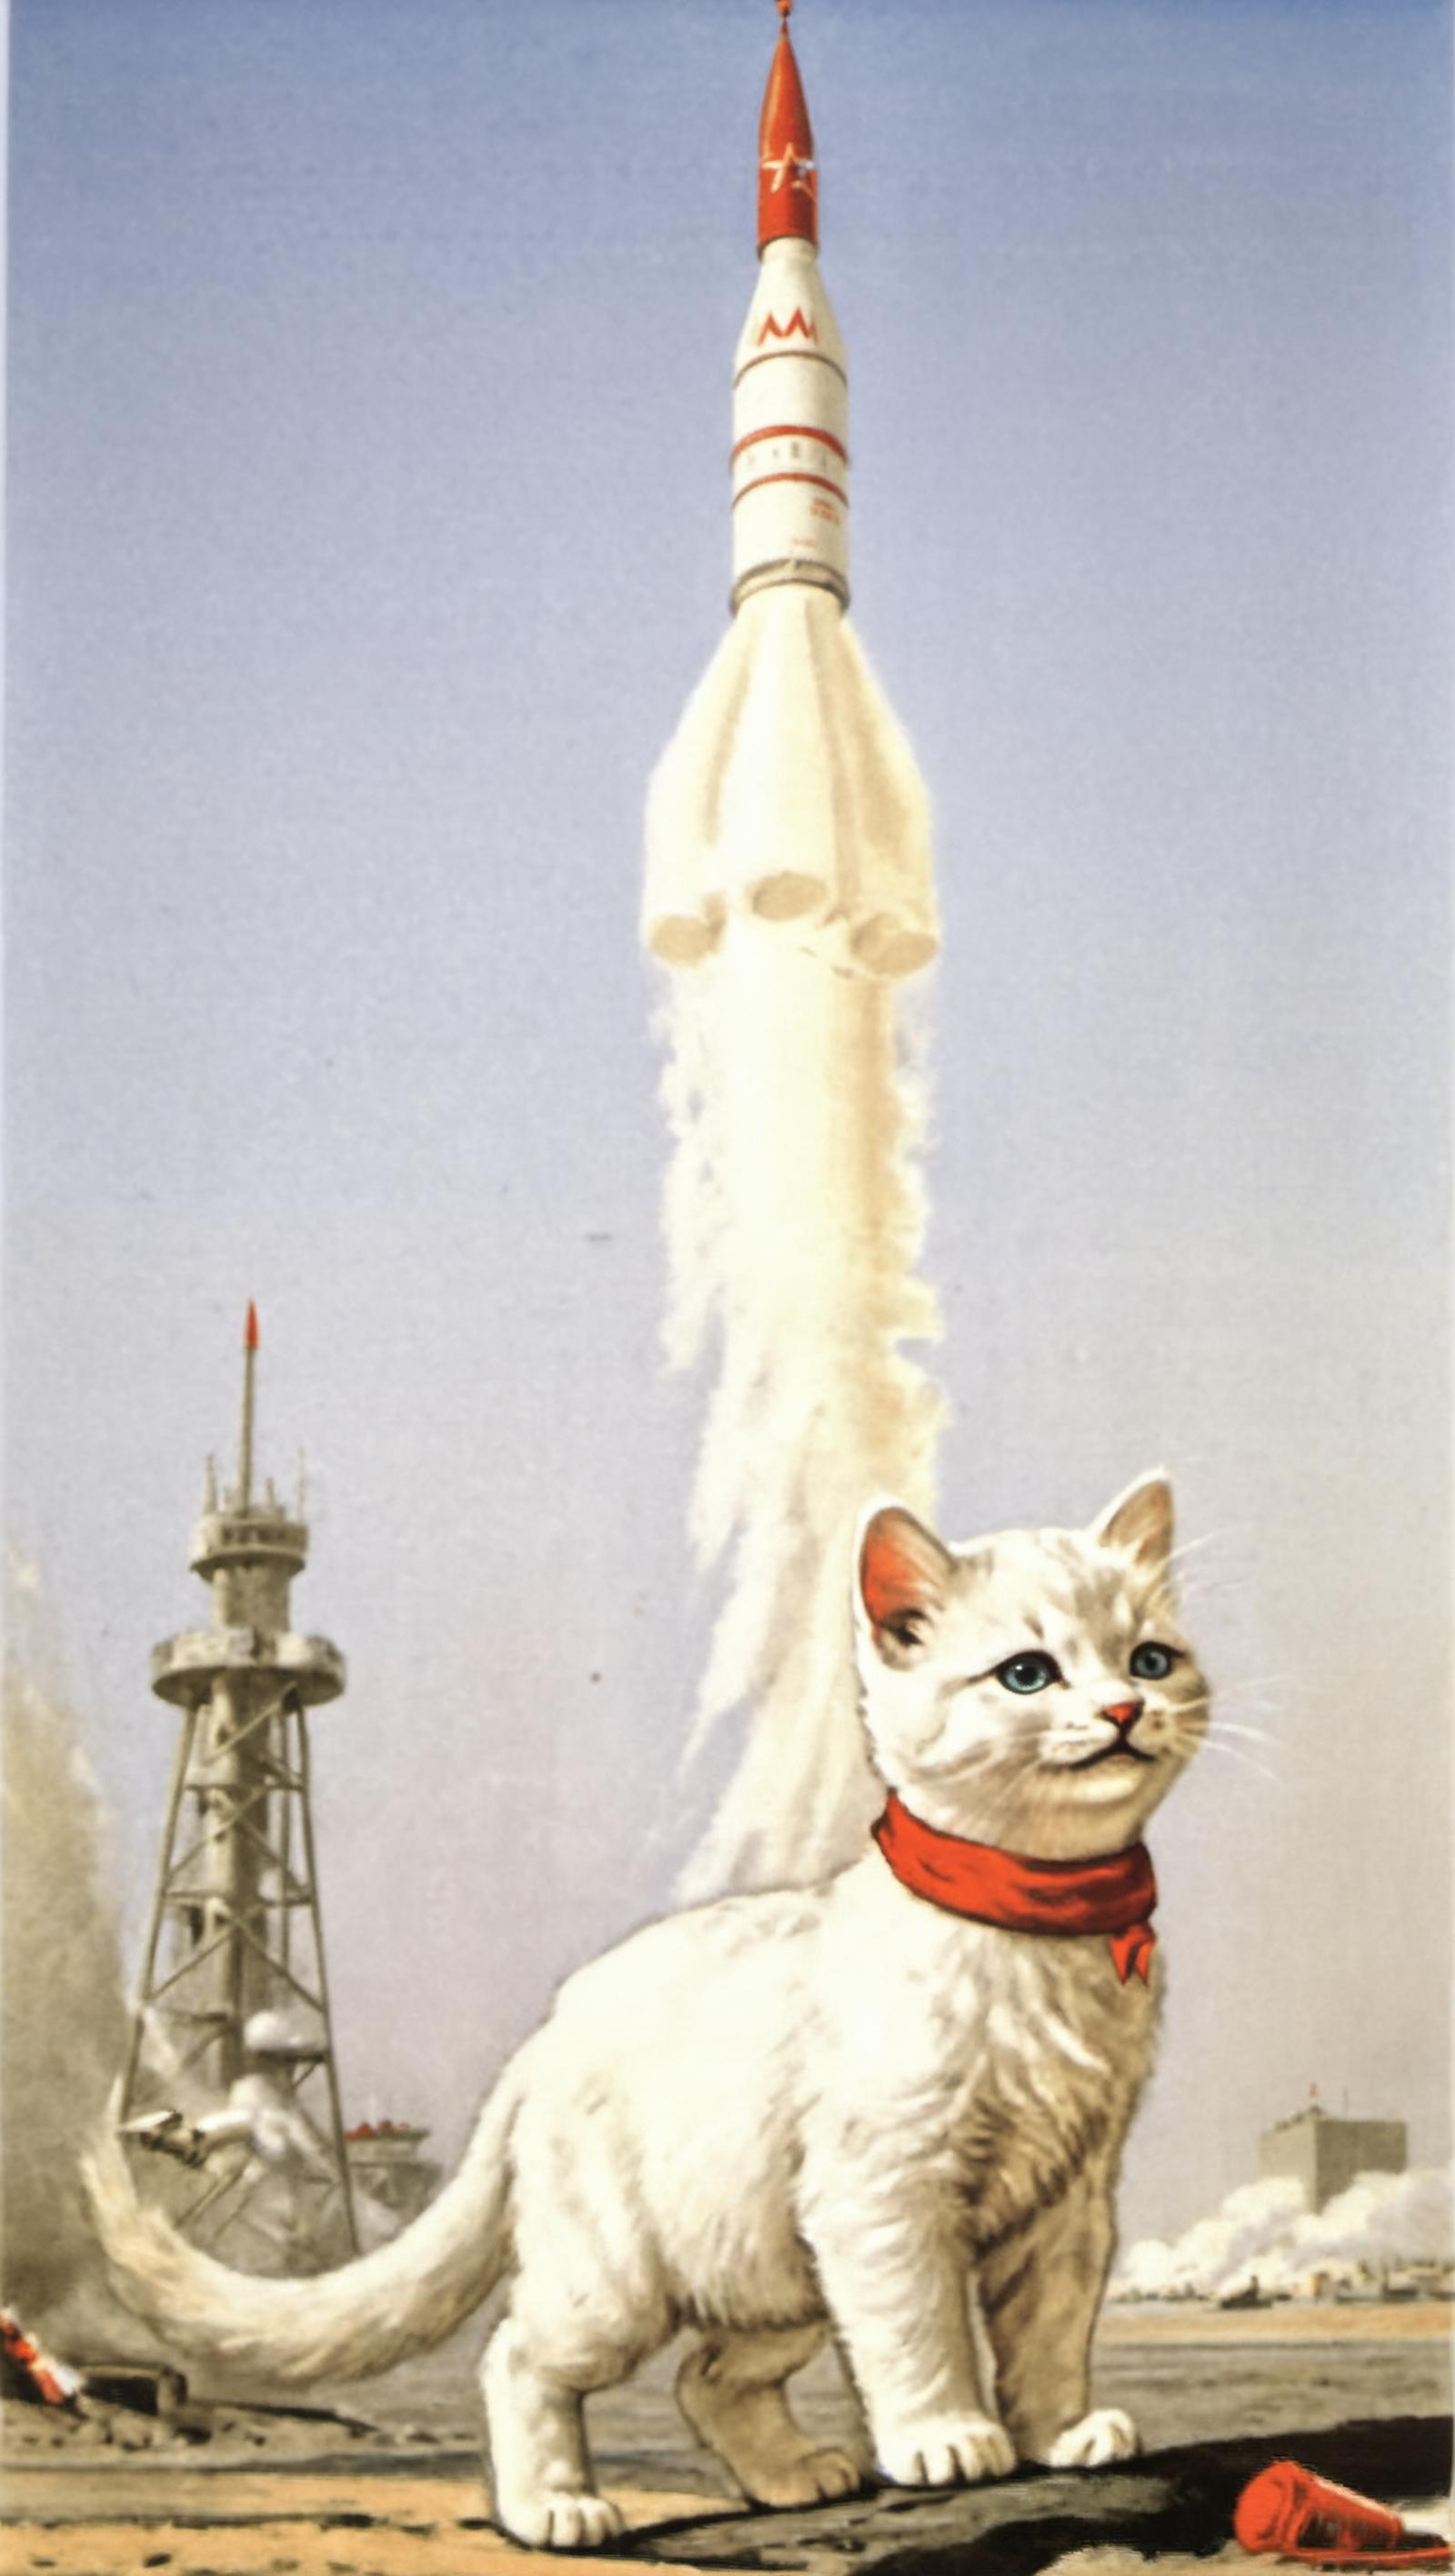 Soviet poster XL image by ComradeMittens